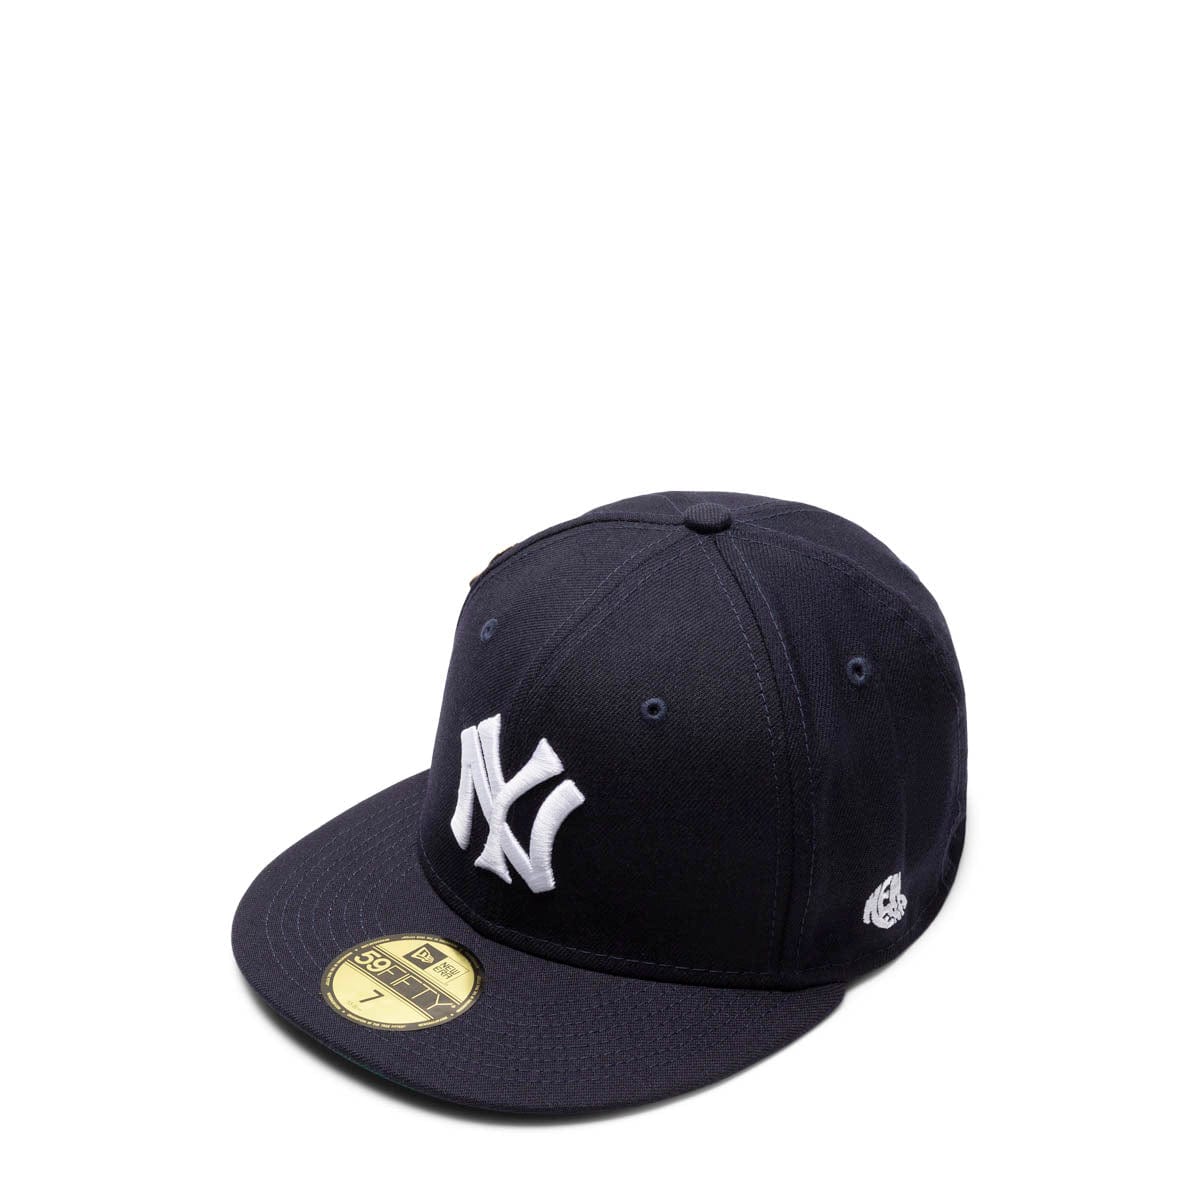 59FIFTY NEW YORK YANKEES (1927) LOGO HISTORY FITTED CAP NAVY